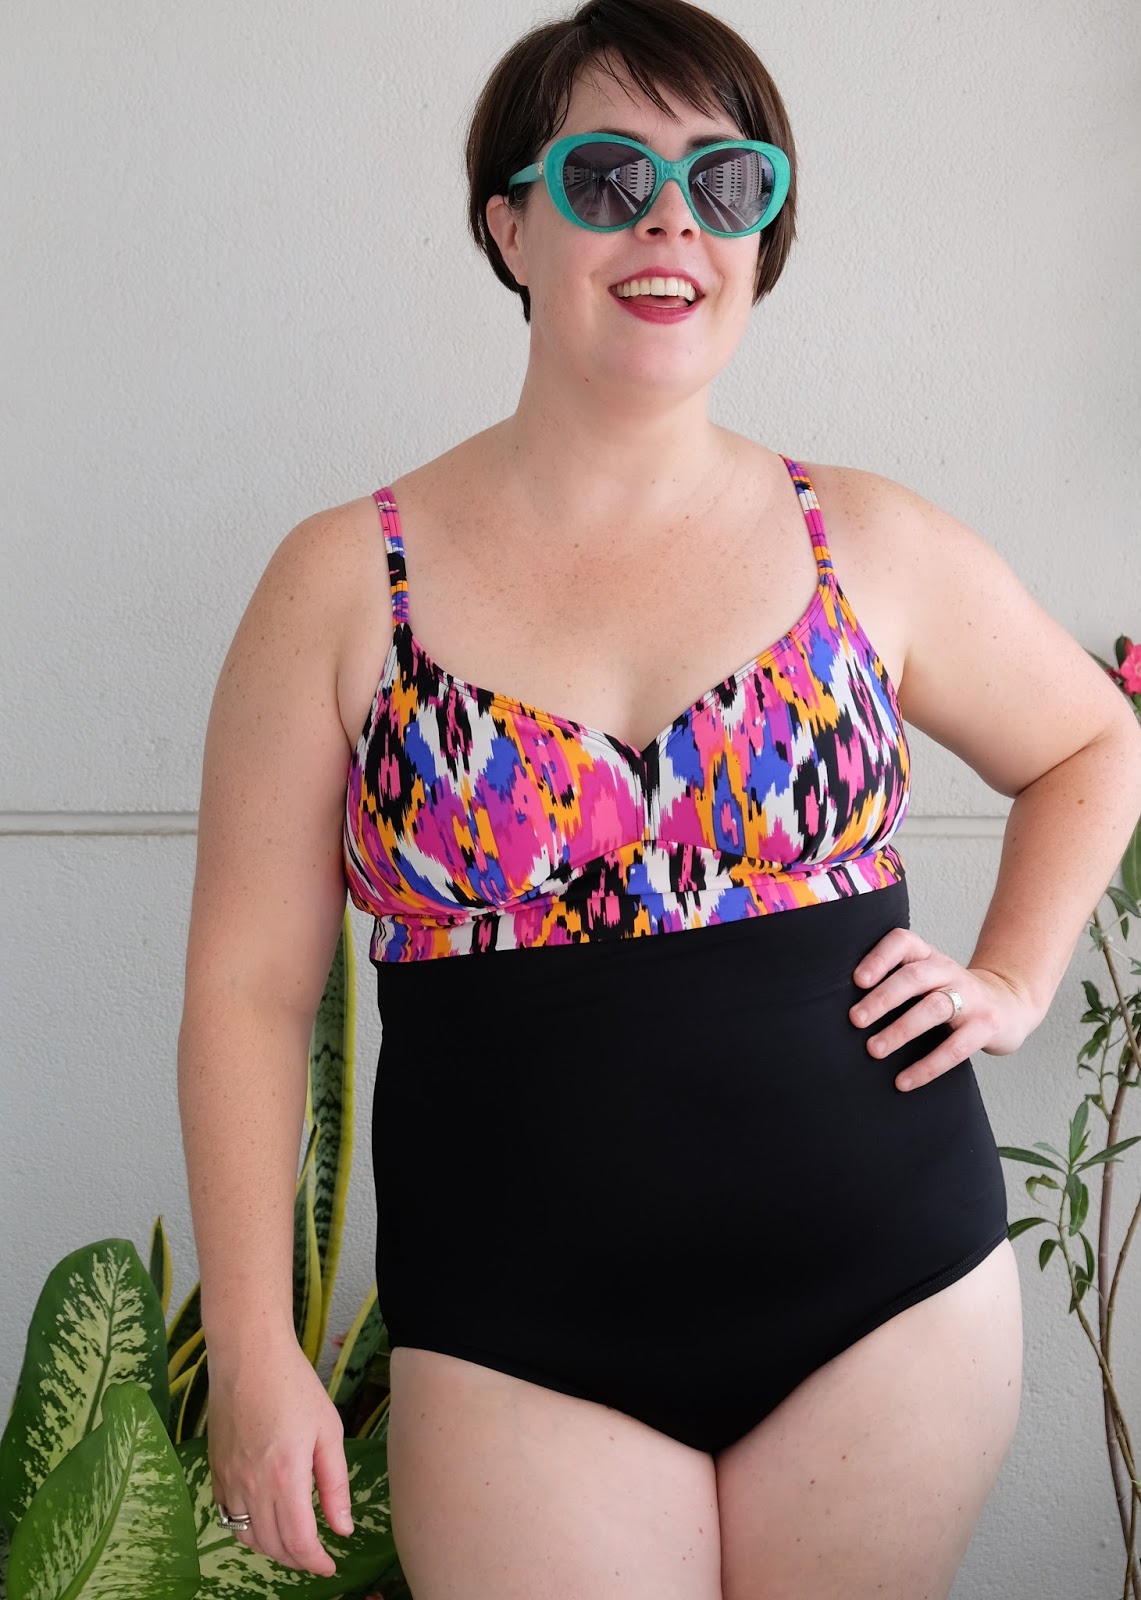 Sewing Pattern Jalie 3350 - One-Piece Swimsuits